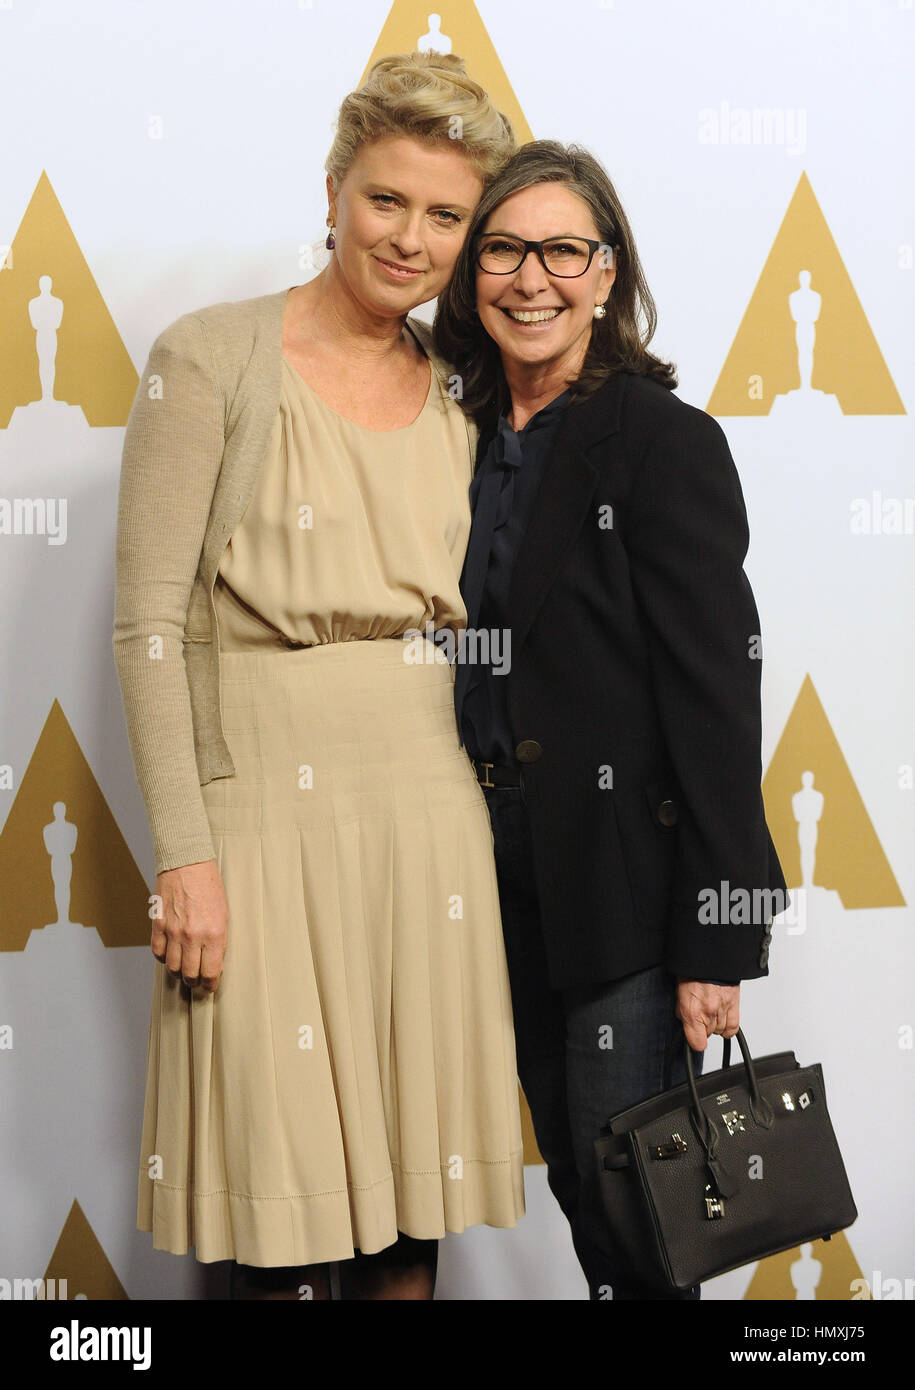 Beverly Hills, California, USA. 6th Feb, 2017. Jenno Topping and Donna Gigliotti arrives for the 2017 Oscar Nominee Luncheon at the Beverly Hilton Hotel. Credit: Lisa O'Connor/ZUMA Wire/Alamy Live News Stock Photo